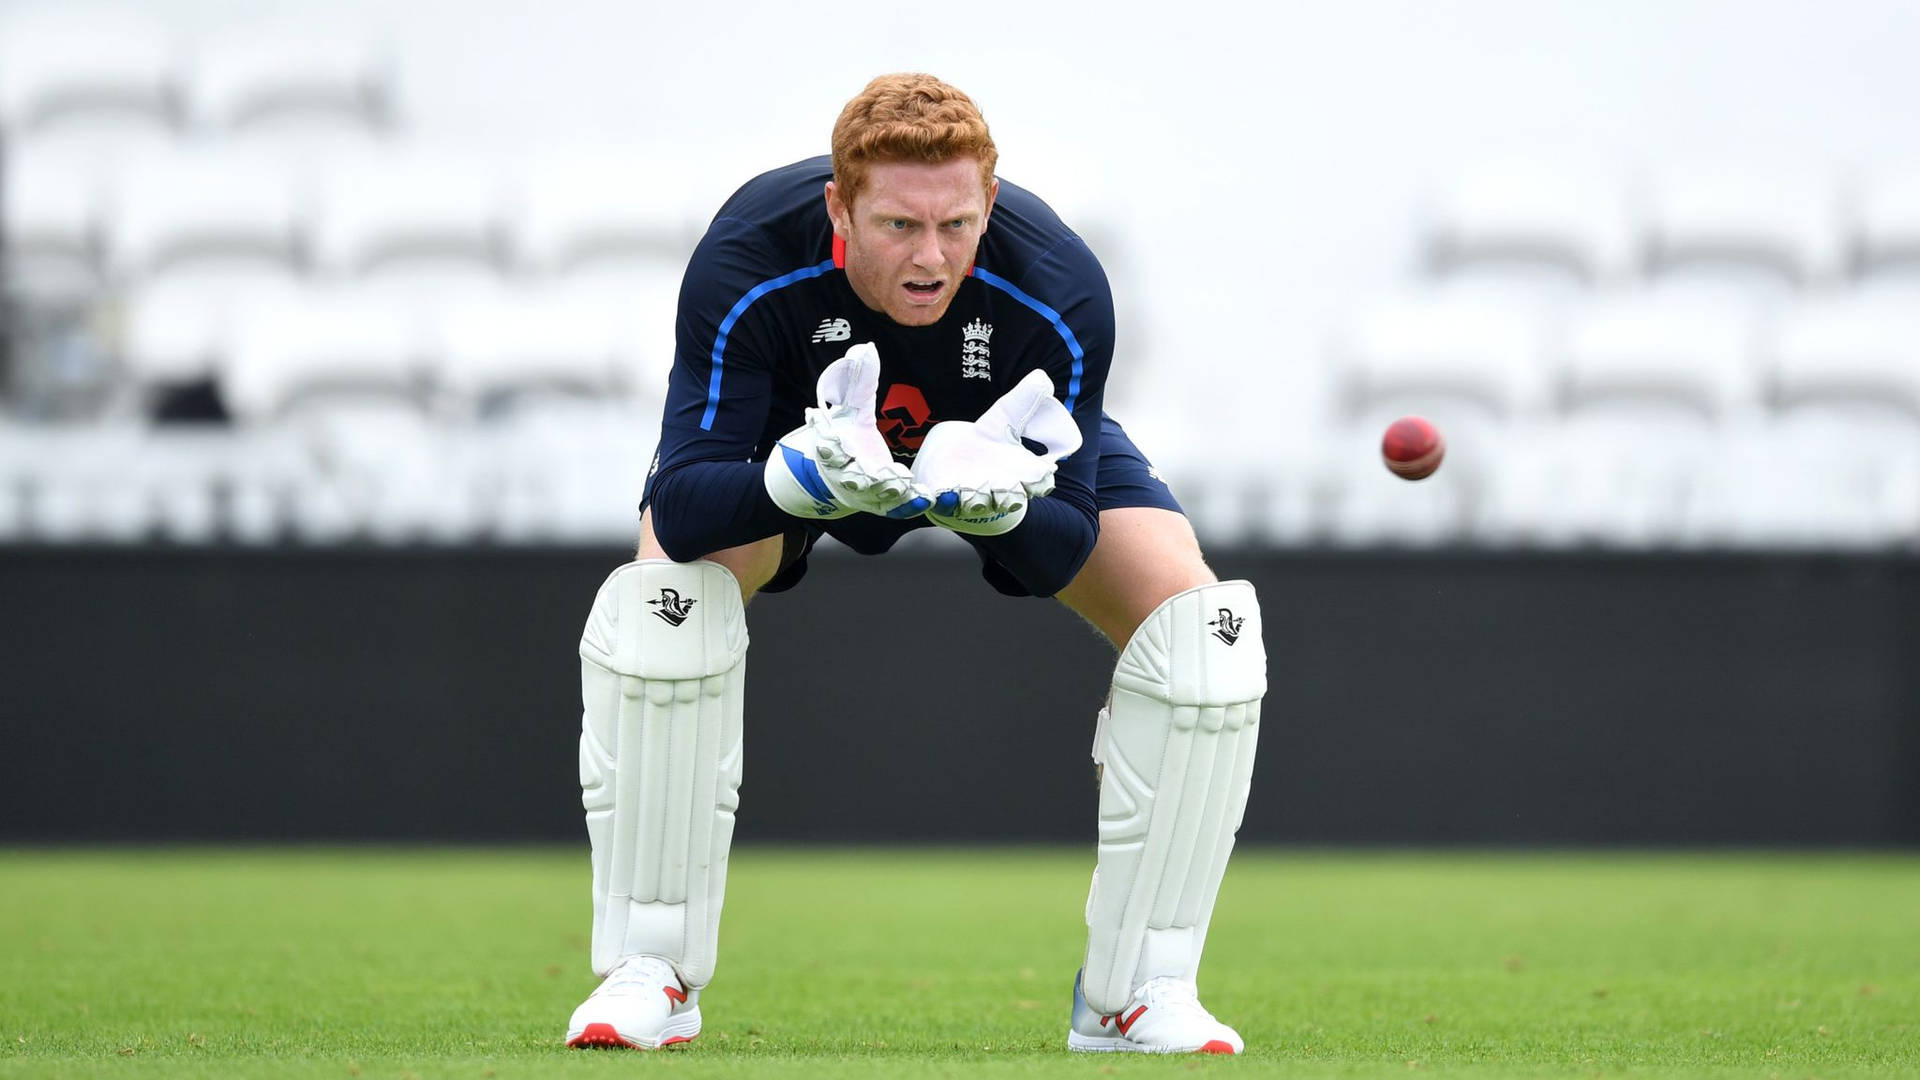 Jonnybairstow Catcher Cricketer Would Be Translated To 